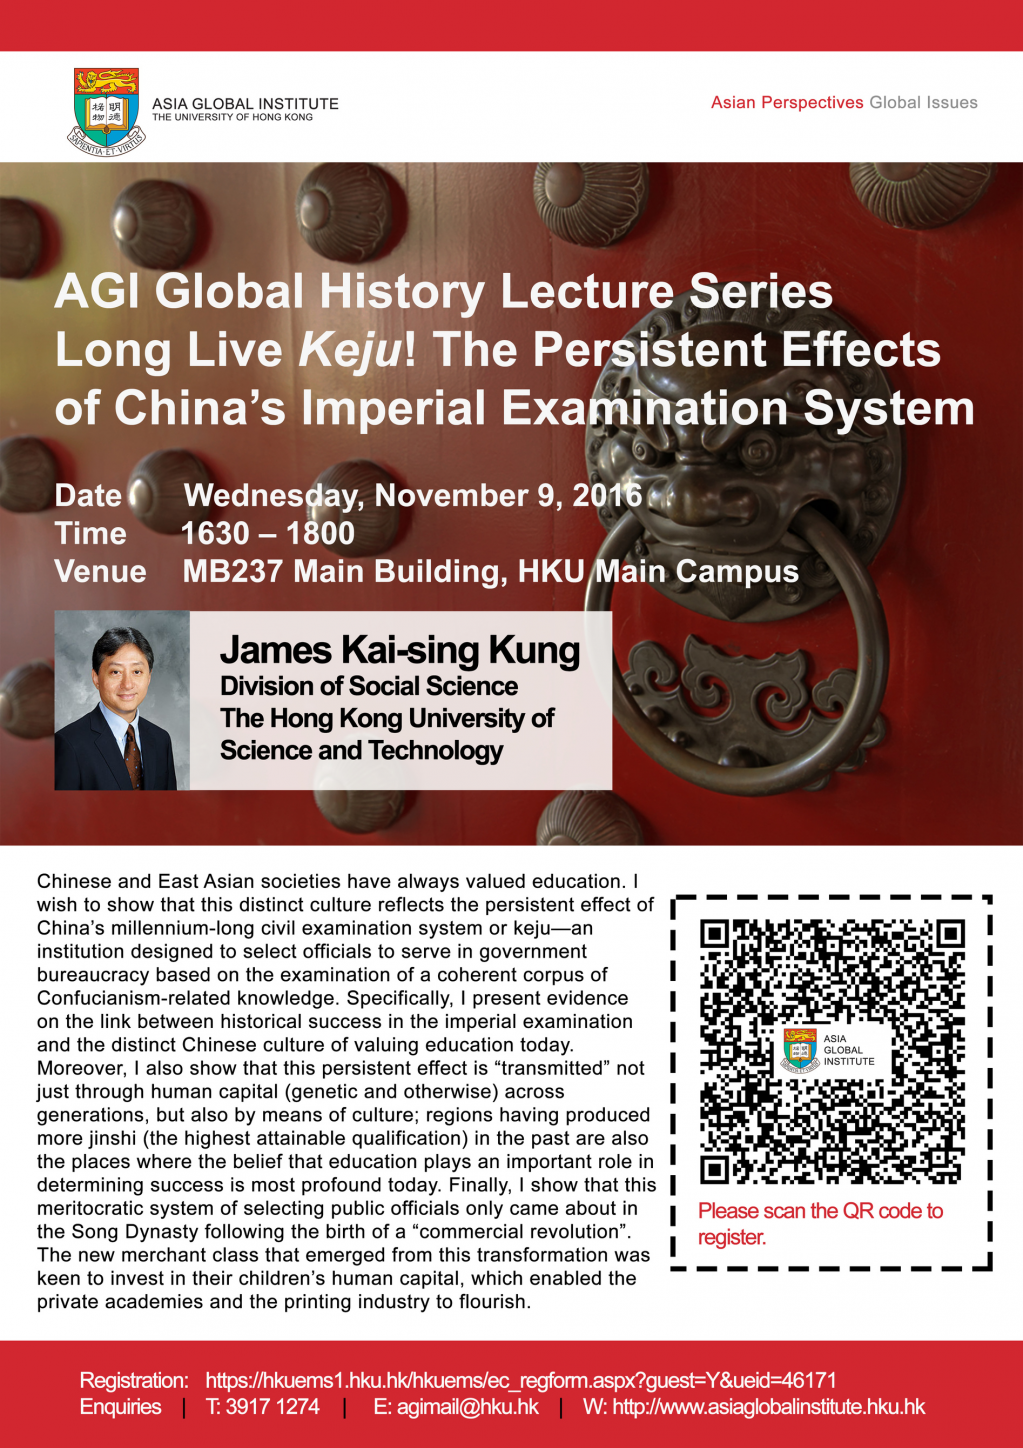 AGI Global History Lecture Series: Long Live Keju! The Persistent Effects of China's Imperial Examination System